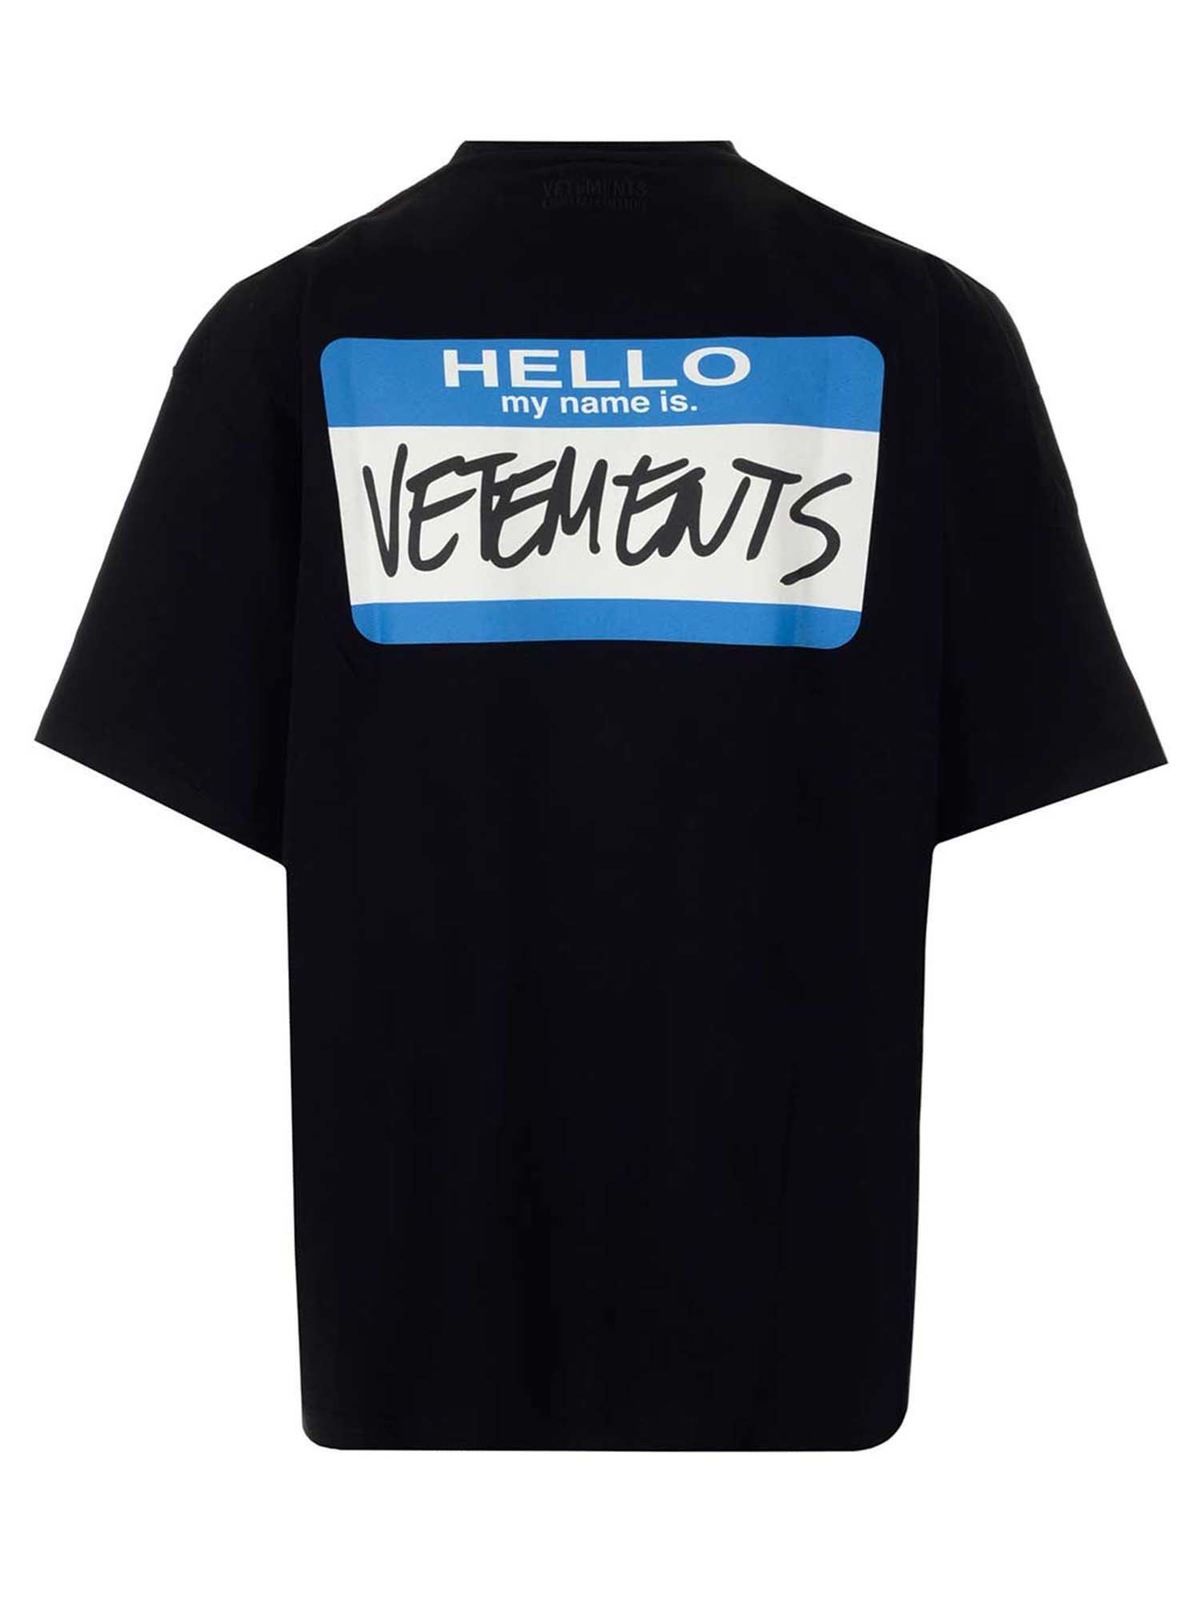 My Name Is Vetements T-shirt in black